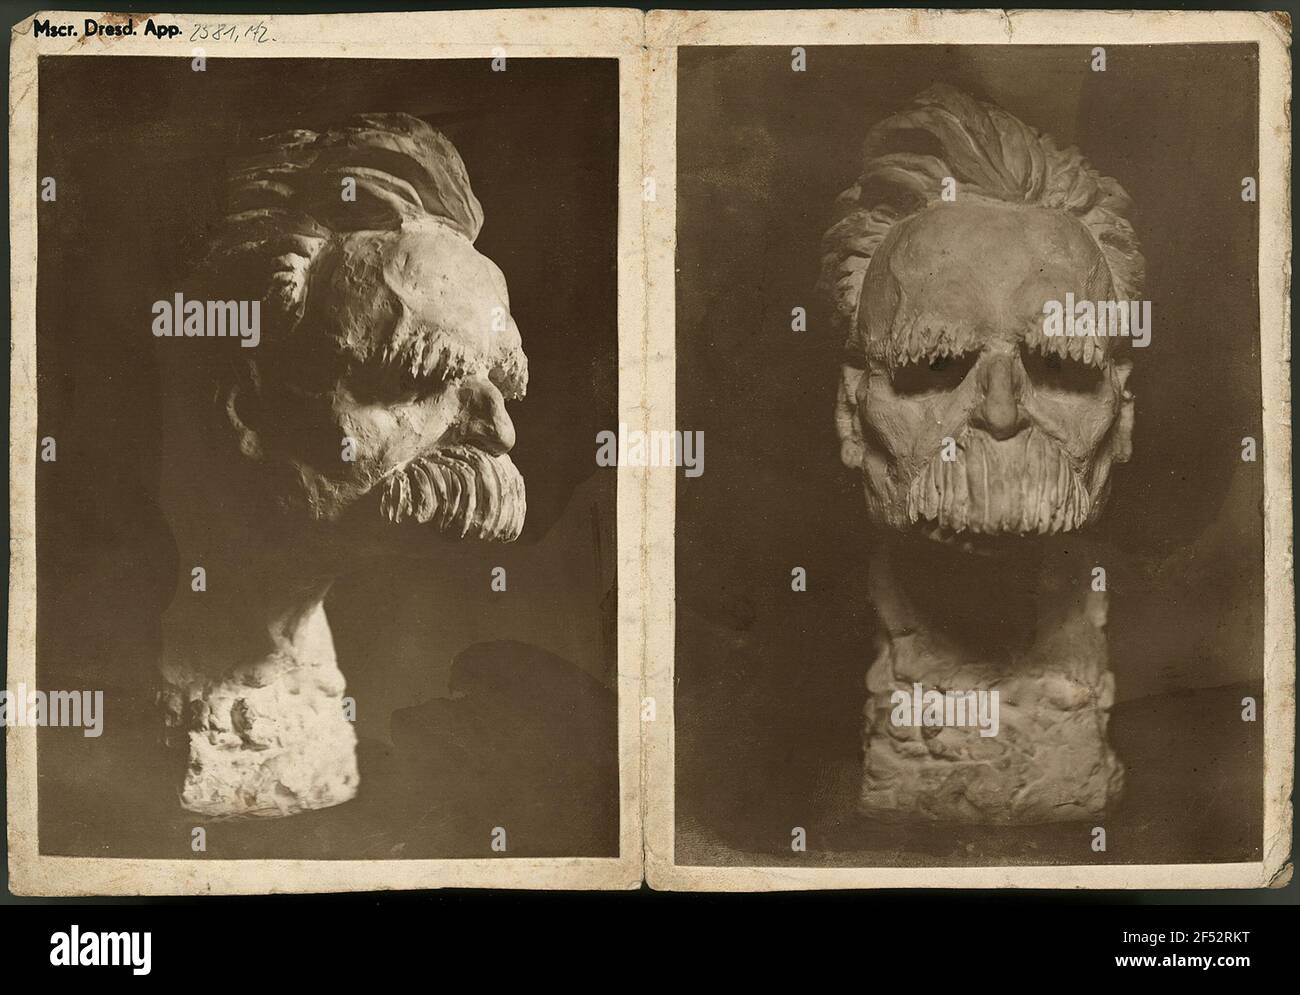 2 Photographs: (Dix, Otto: Bust Friedrich Nietzsche. Gypsum, green tinted, 1912) à 16.3 x 11.8 cm. Mounted on centrally folded carton leaf across-4 °, on this (turned by 180 °) a pencil drawing and a text of Otto Dix Stock Photo